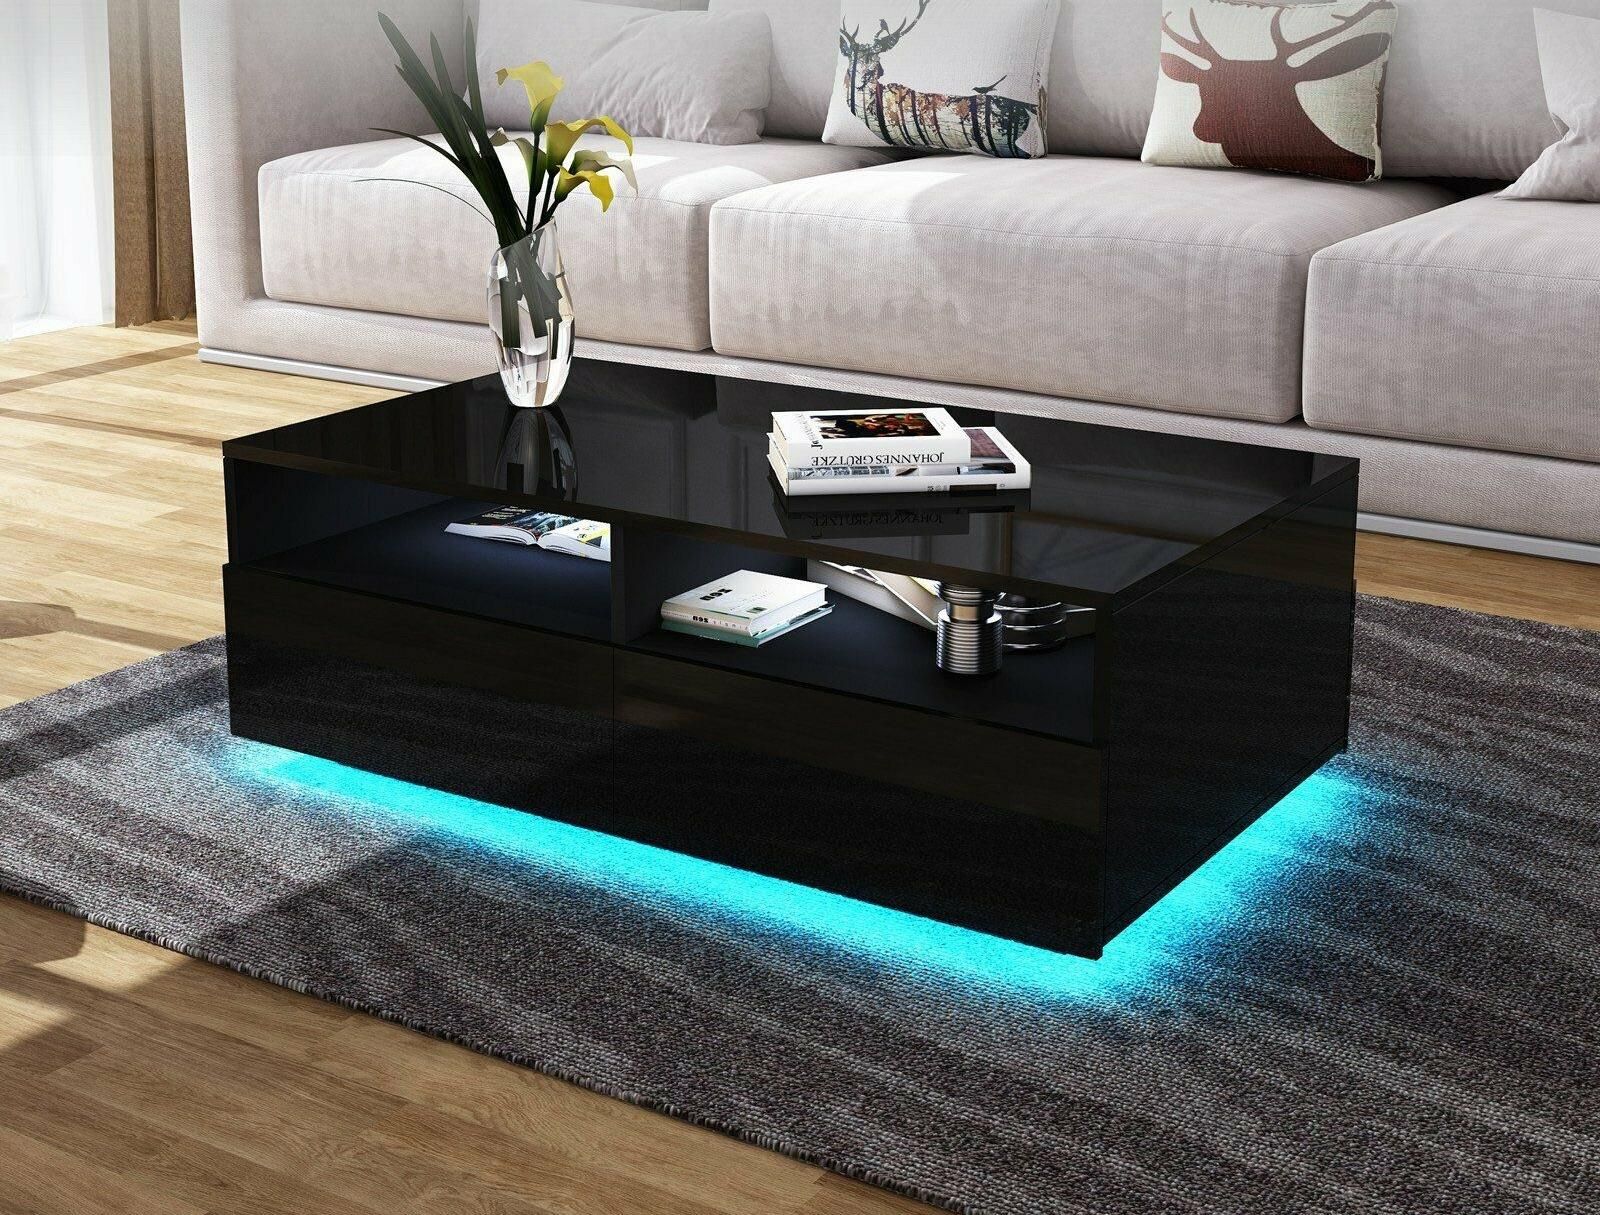 Living Room Rectangle Coffee Table 4 Drawers Rgb 16 Color Led Lights | Ebay Intended For Led Coffee Tables With 4 Drawers (View 6 of 20)